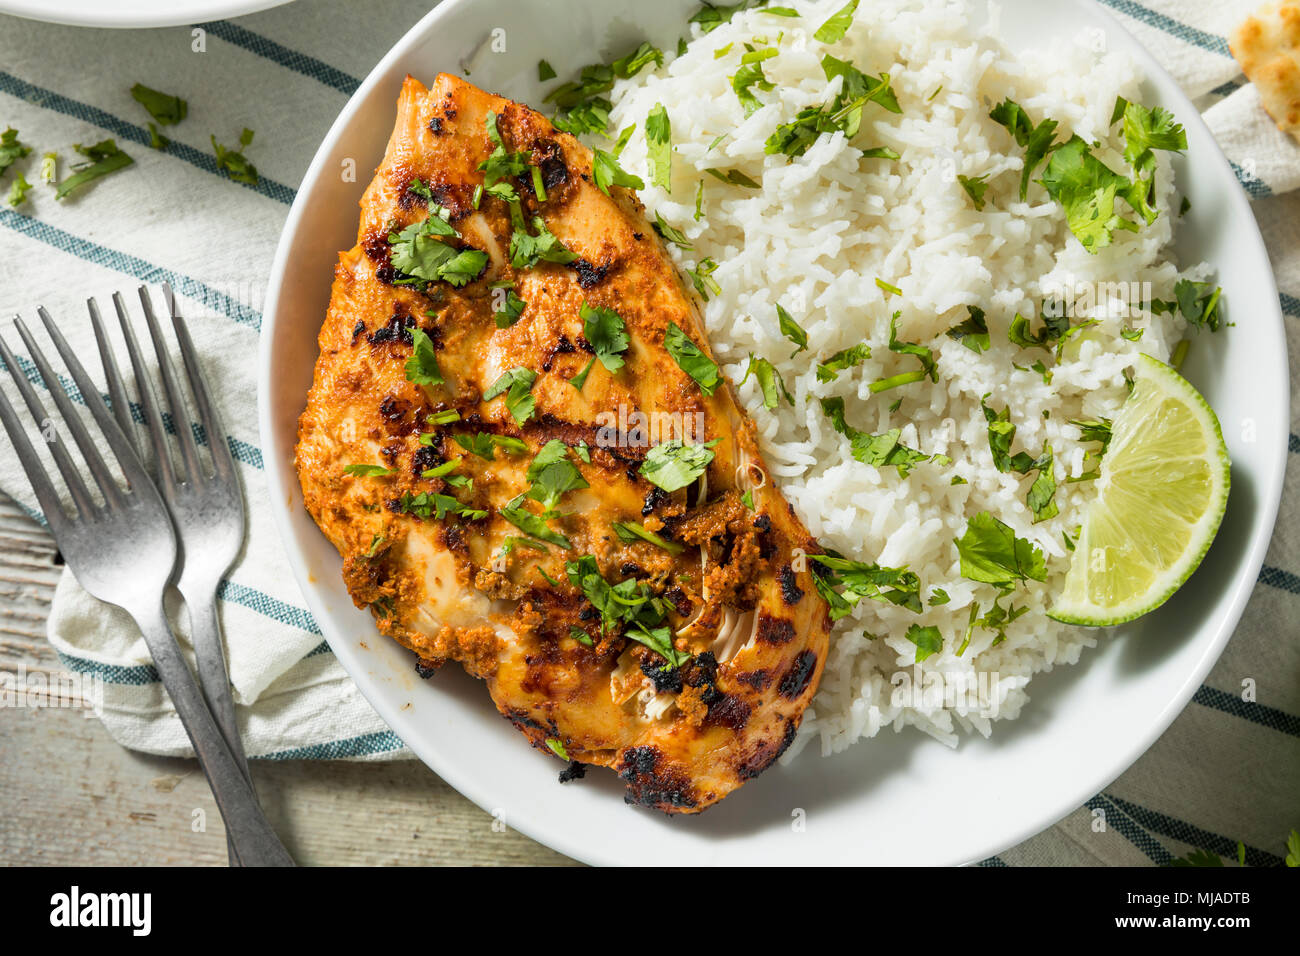 Homemade Indian Tandoori Chicken with Rice and Naan Bread Stock Photo